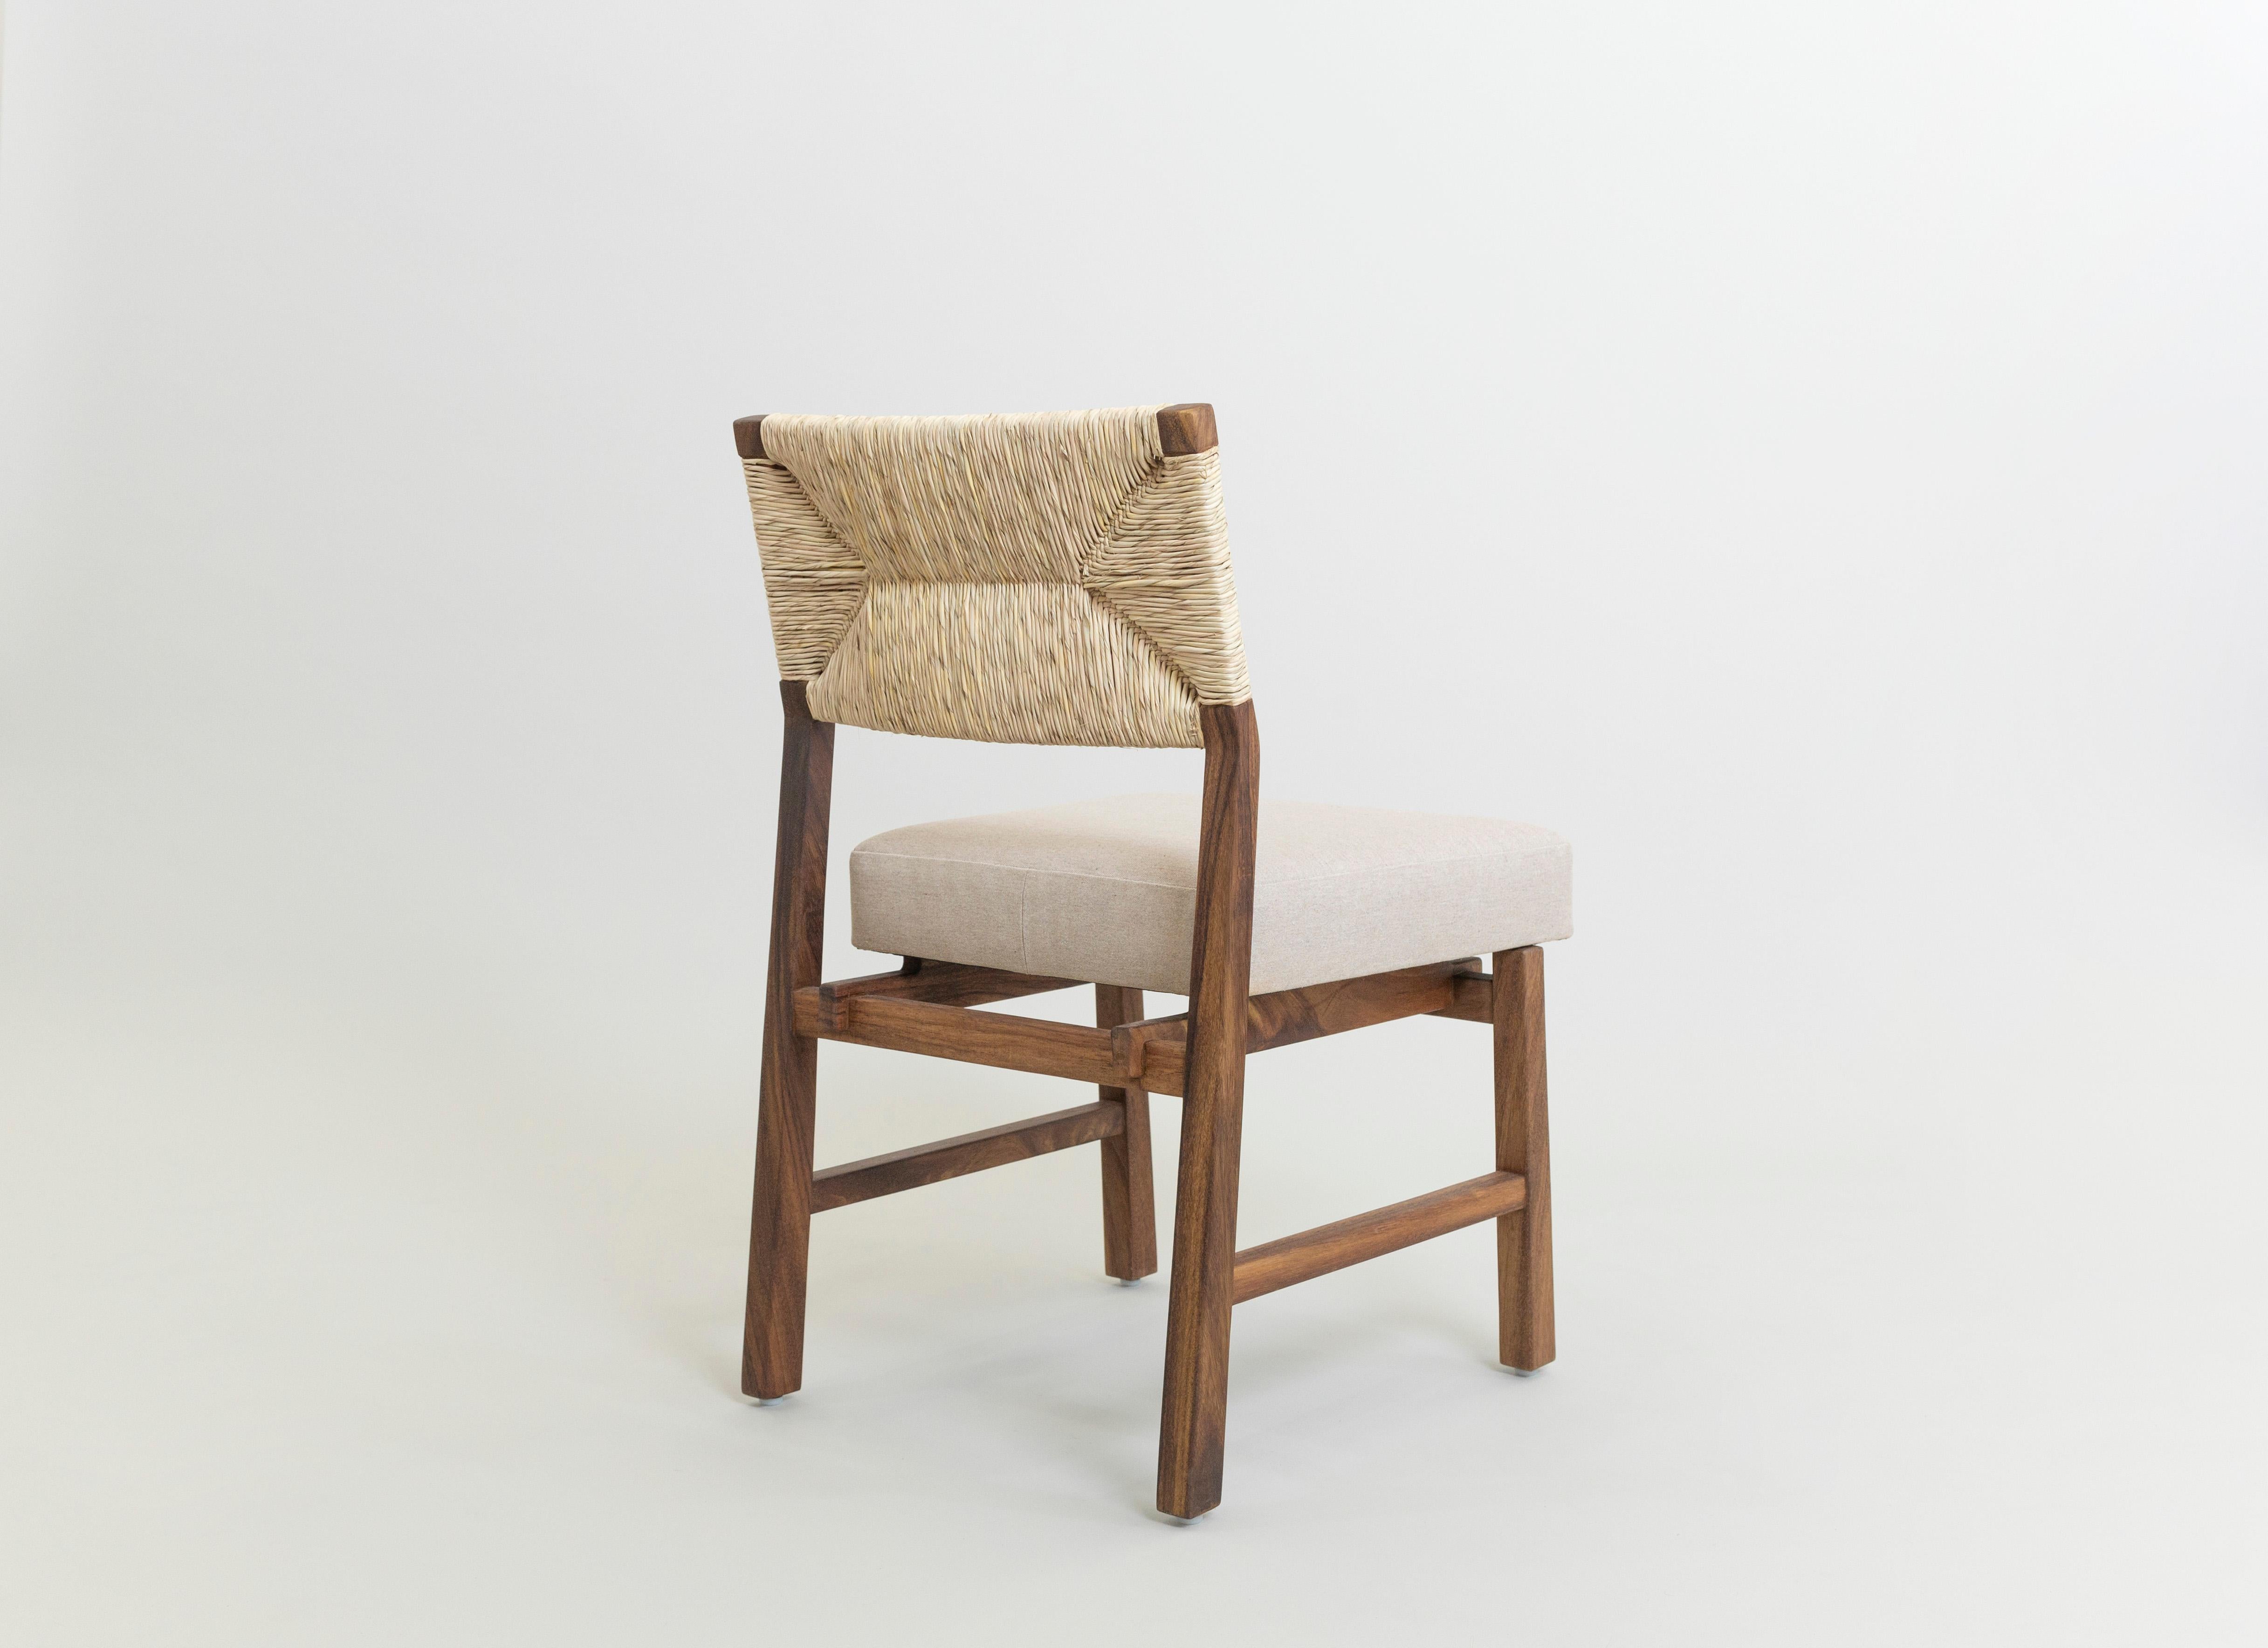 This Classic design has a modern flourish without overshadowing the handcrafted details from the Natural Palm woven back that makes it so unique. The Lago dining chair is made of solid Huanacaxtle, a tropical hardwood from southern Mexico. The